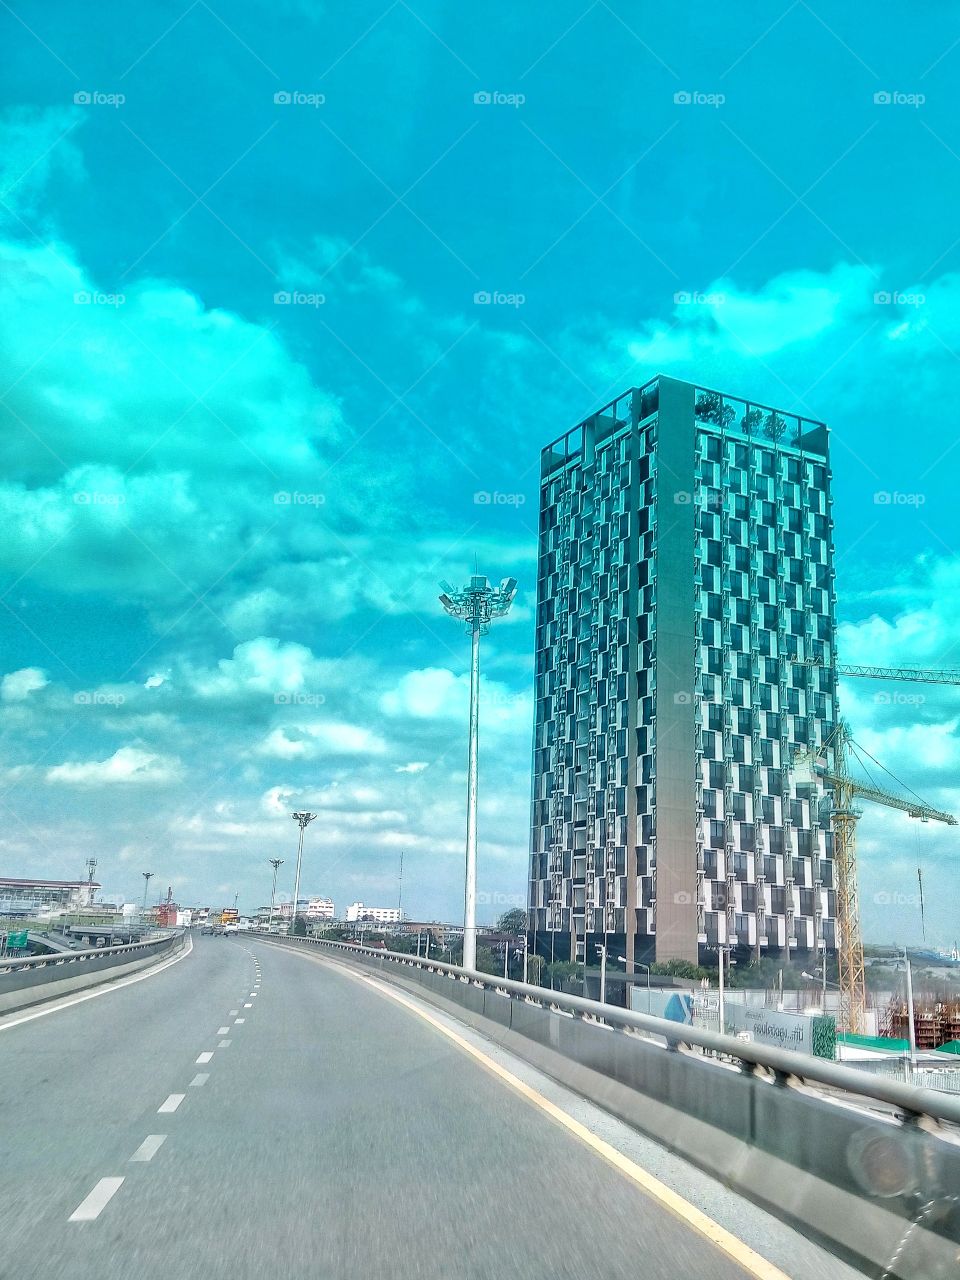 high way and tall building